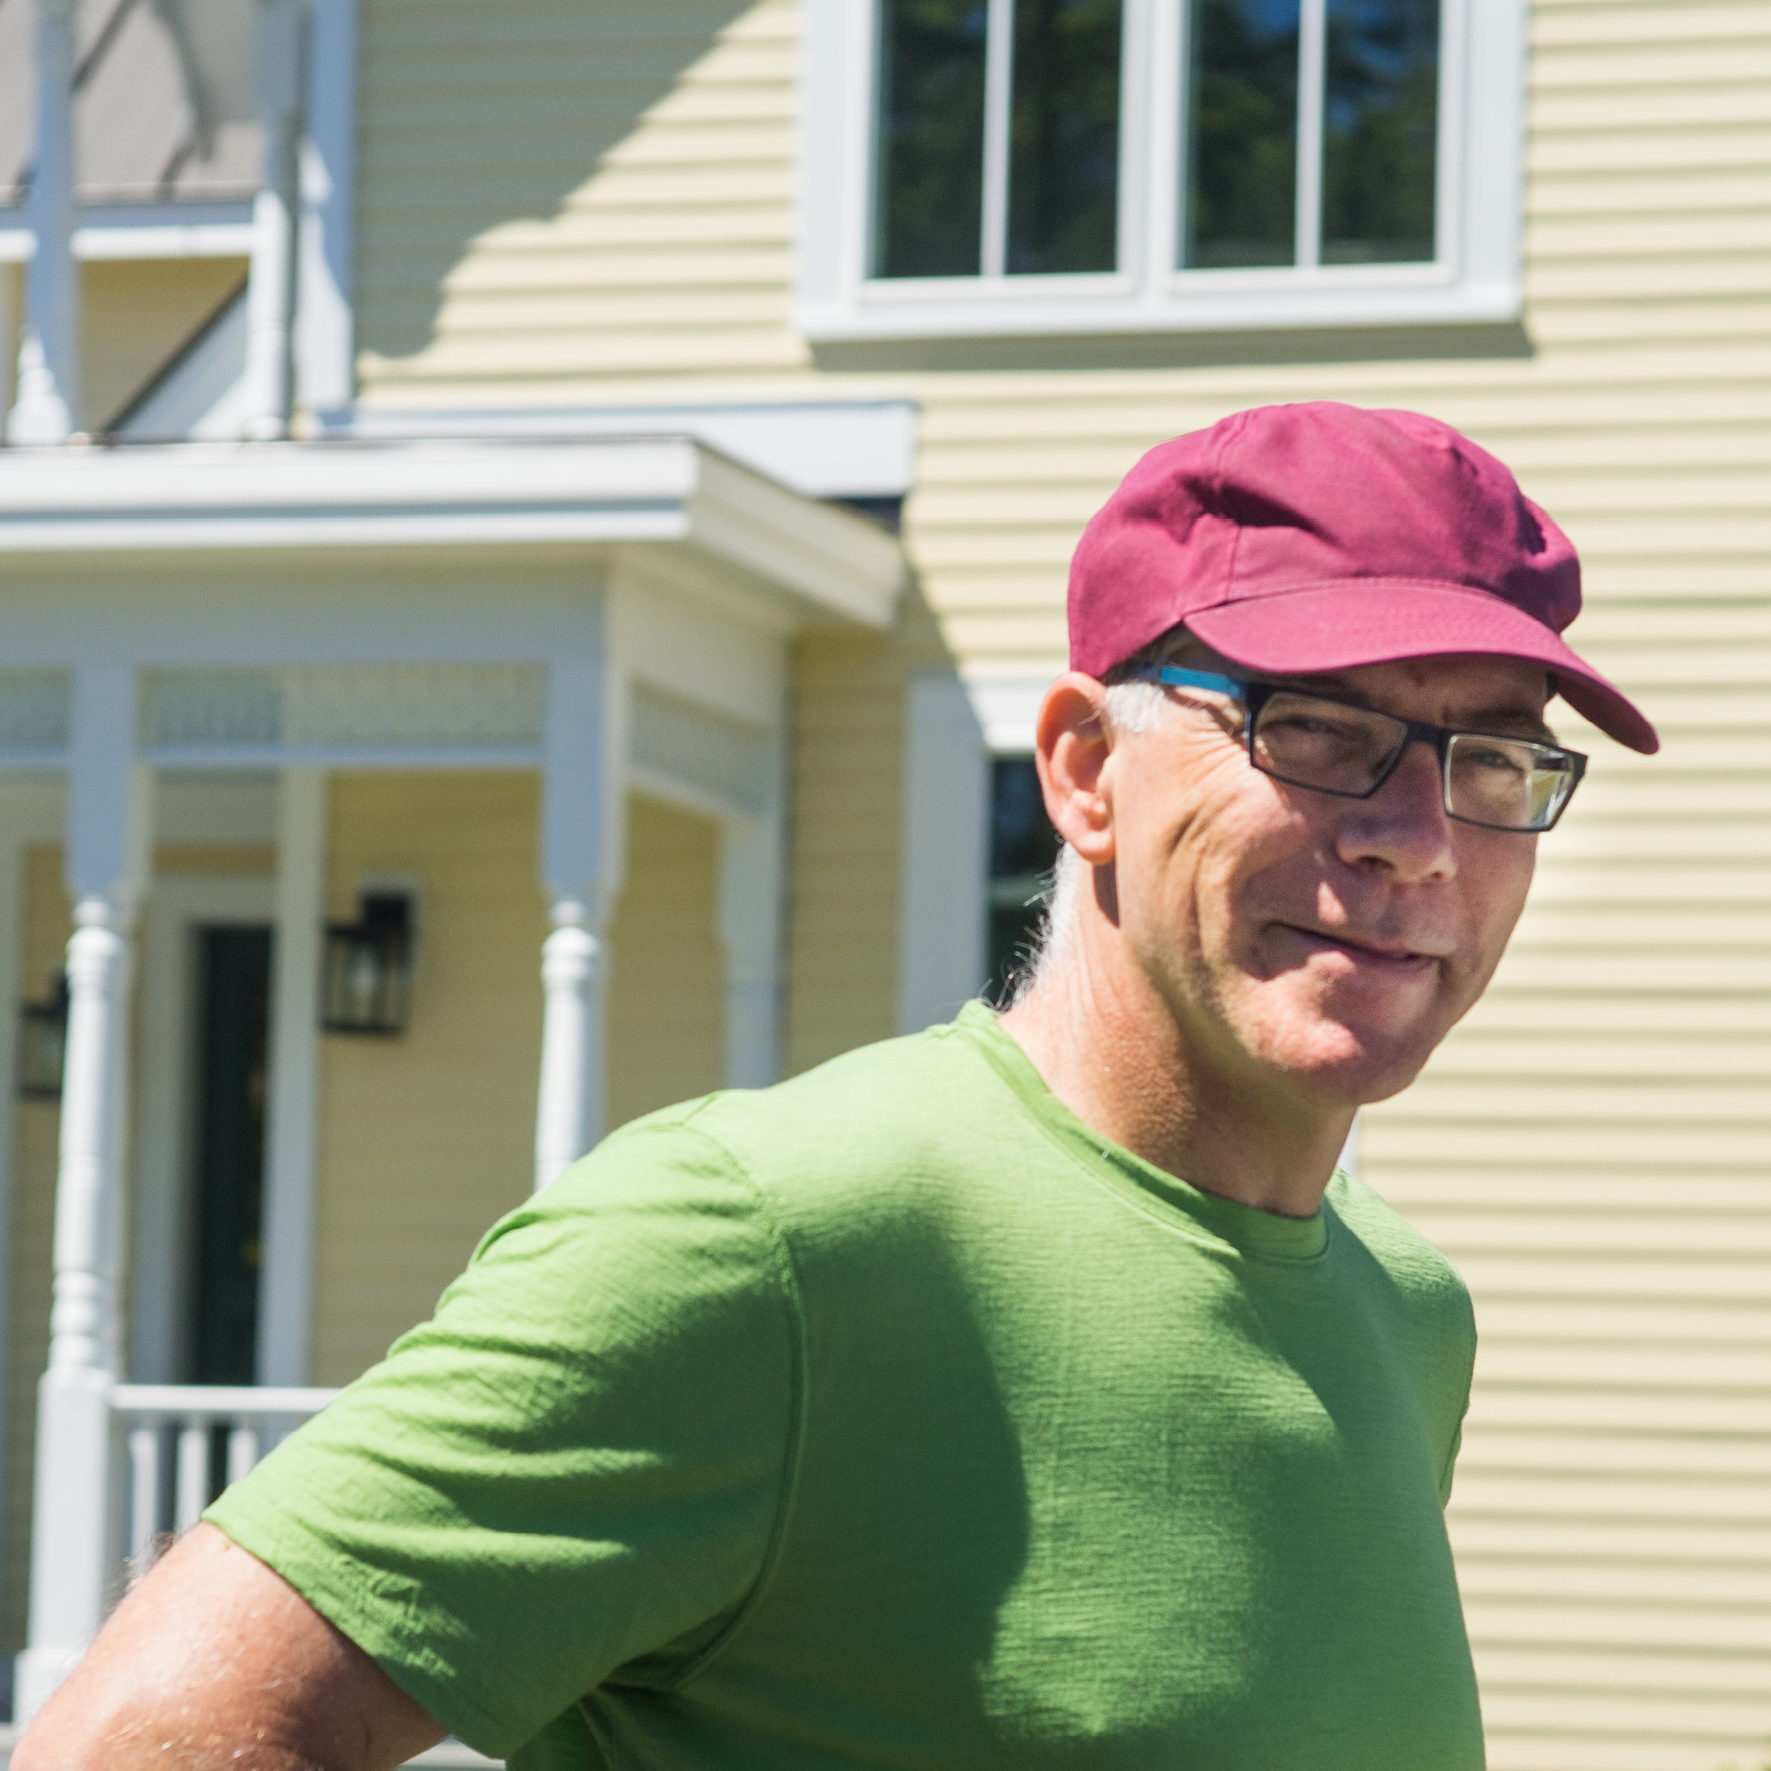 Middle aged man wearing red baseball cap and green T-shirt standing in front of yellow house